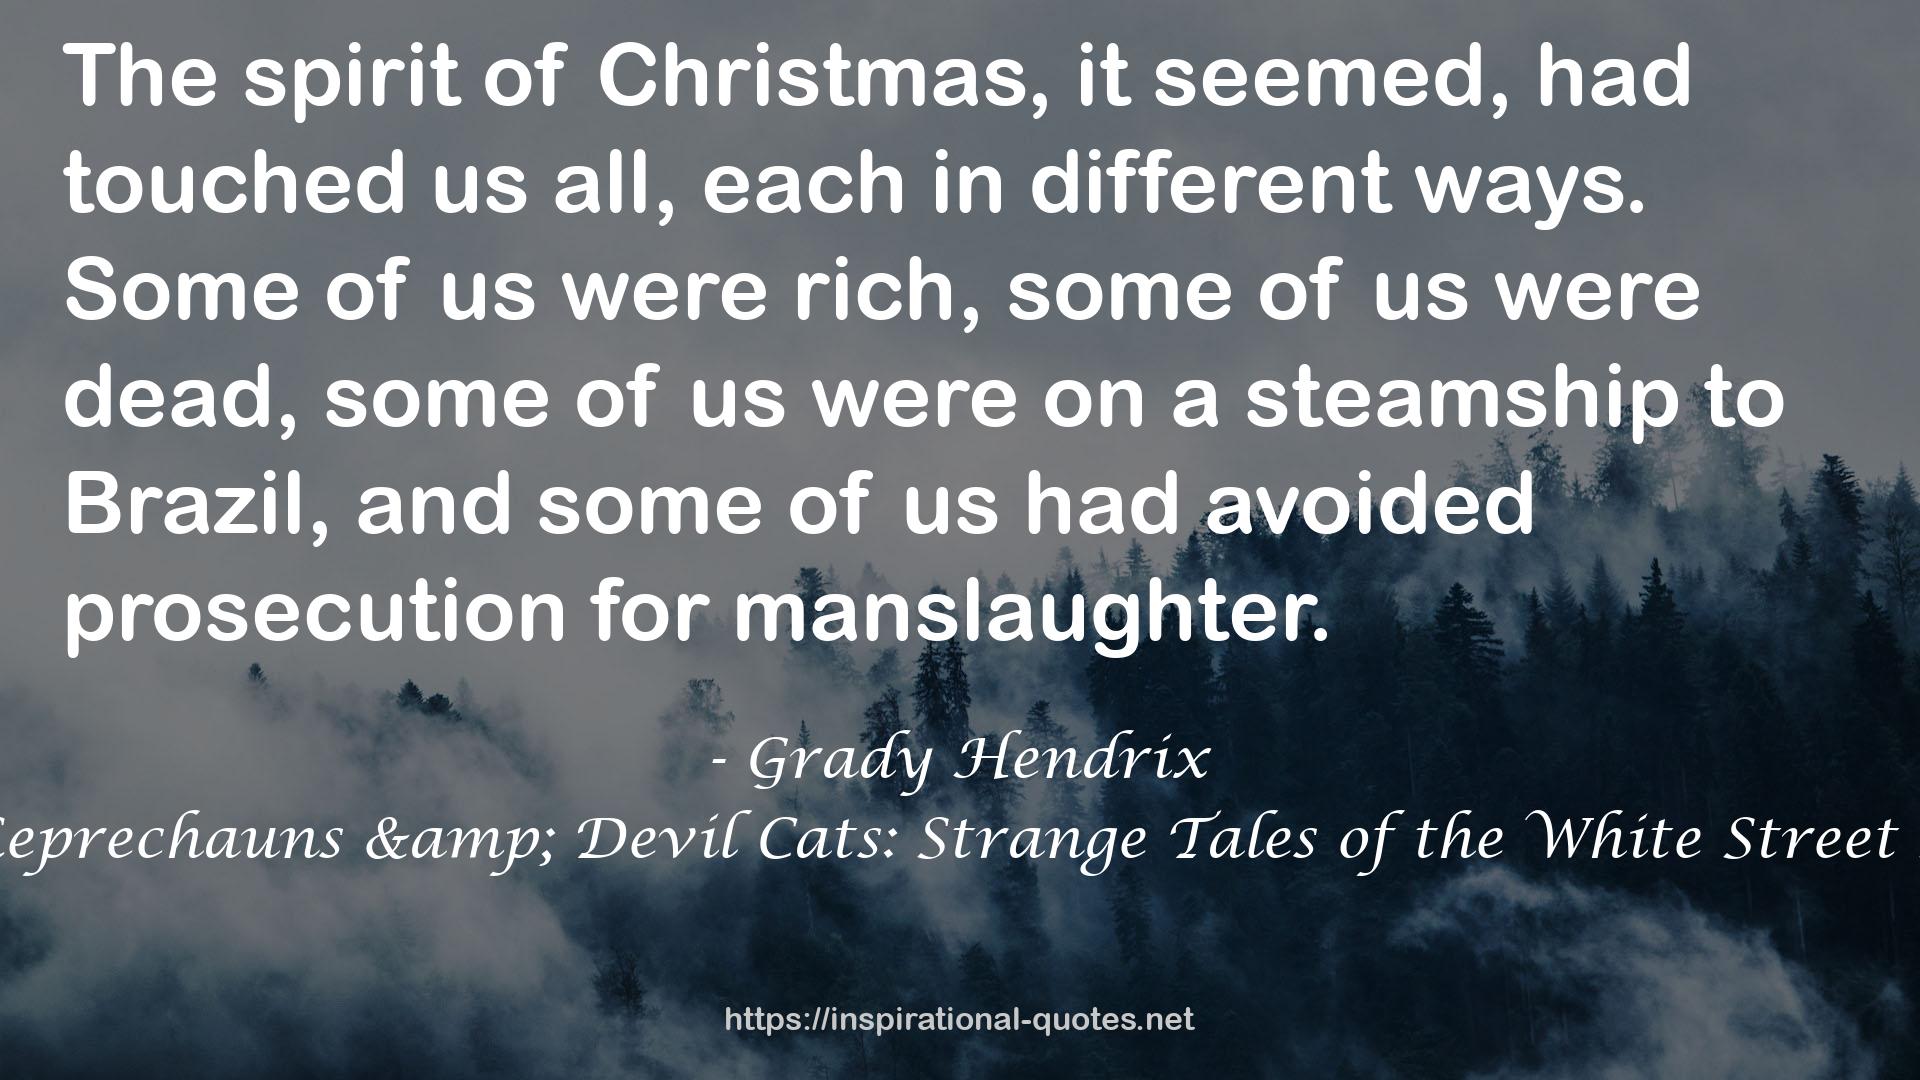 Dead Leprechauns & Devil Cats: Strange Tales of the White Street Society QUOTES